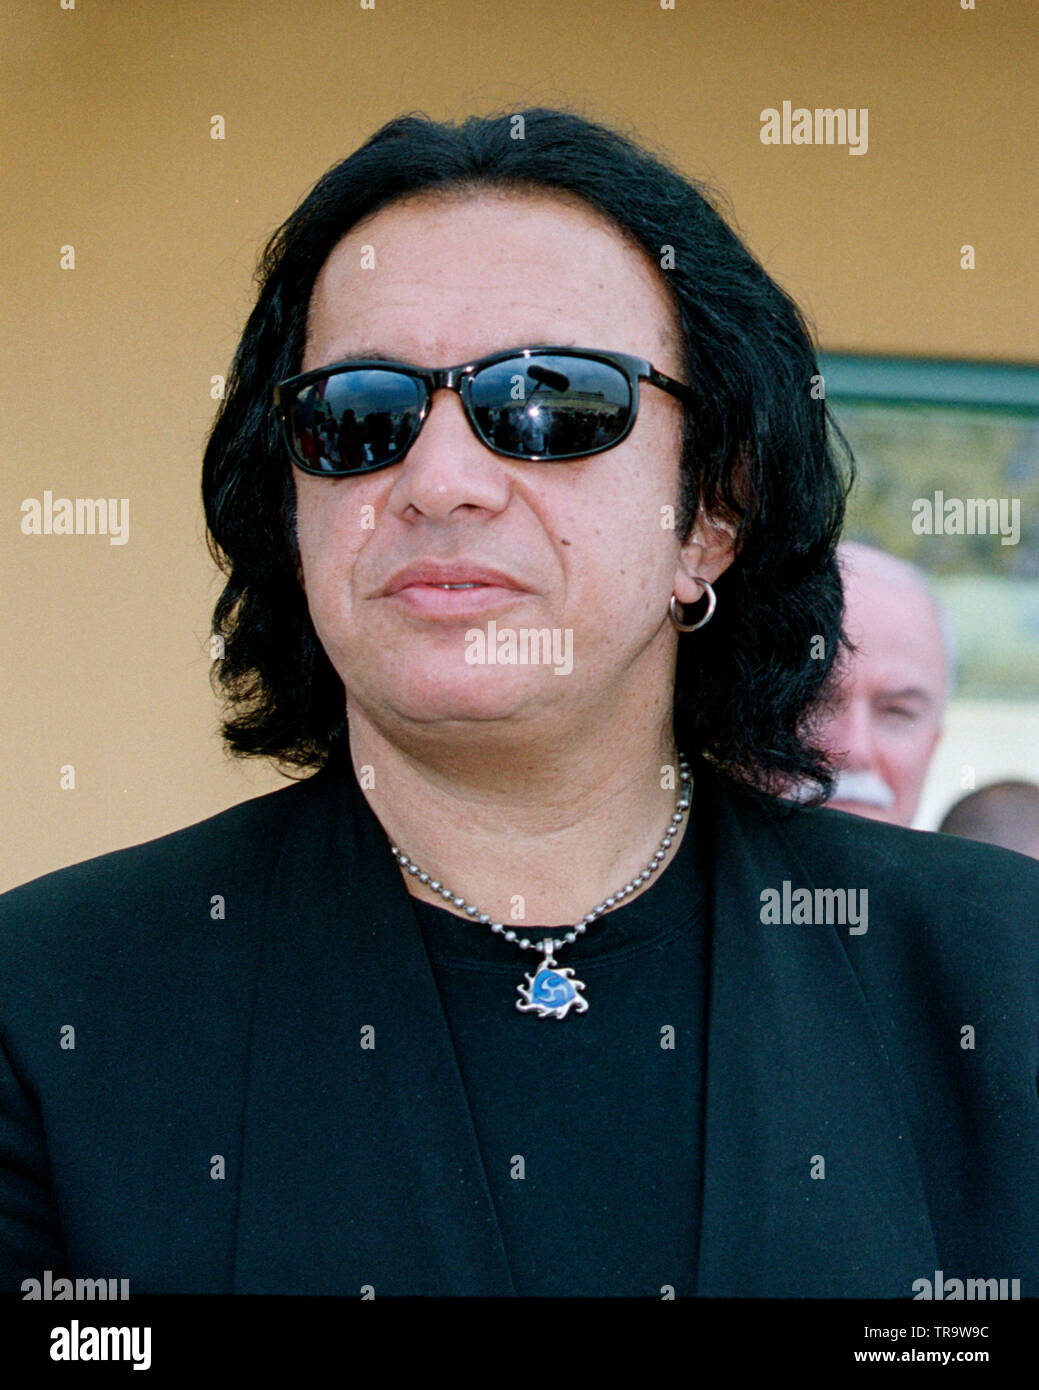 Gene Simmons fron the legendary rock band KISS attends a NASCAR race at Homestead Miami Speedway in November 1997. Stock Photo